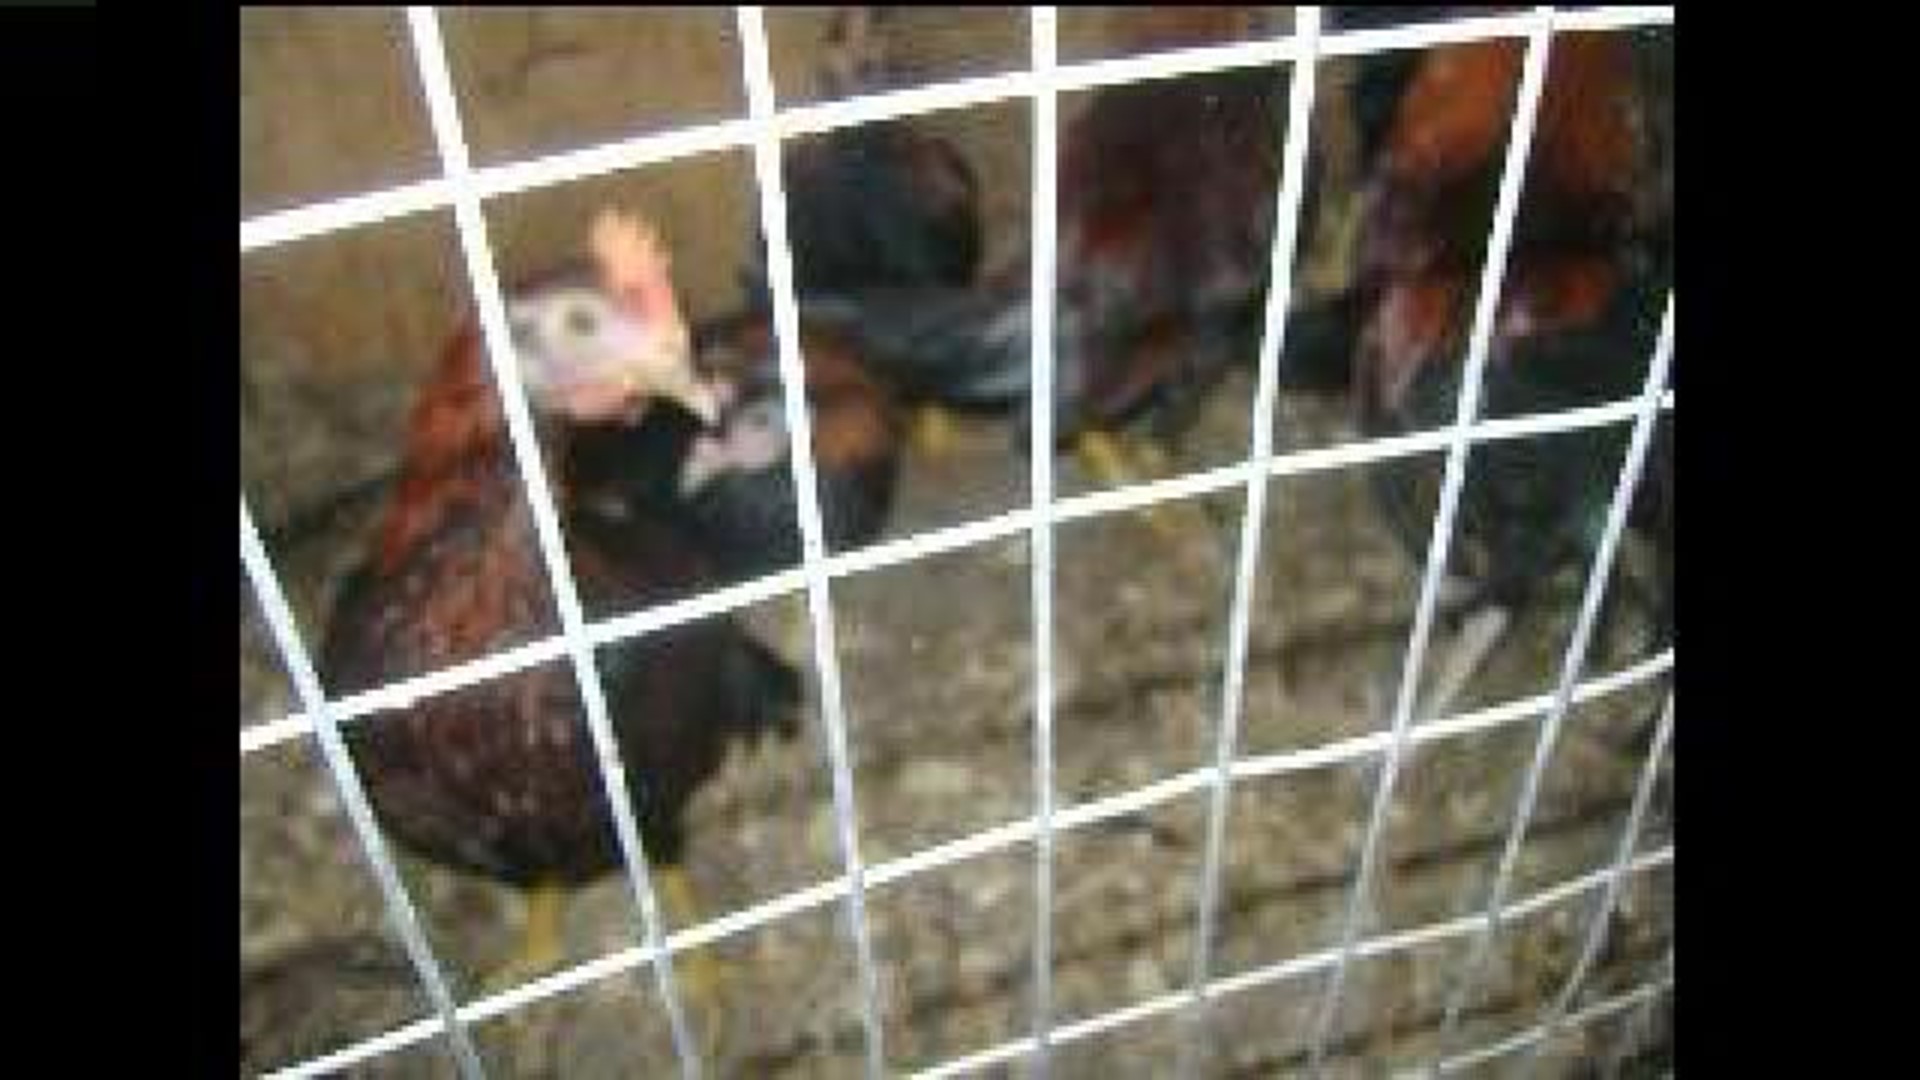 Chickens Taken From Hazleton Home, Questions Remain